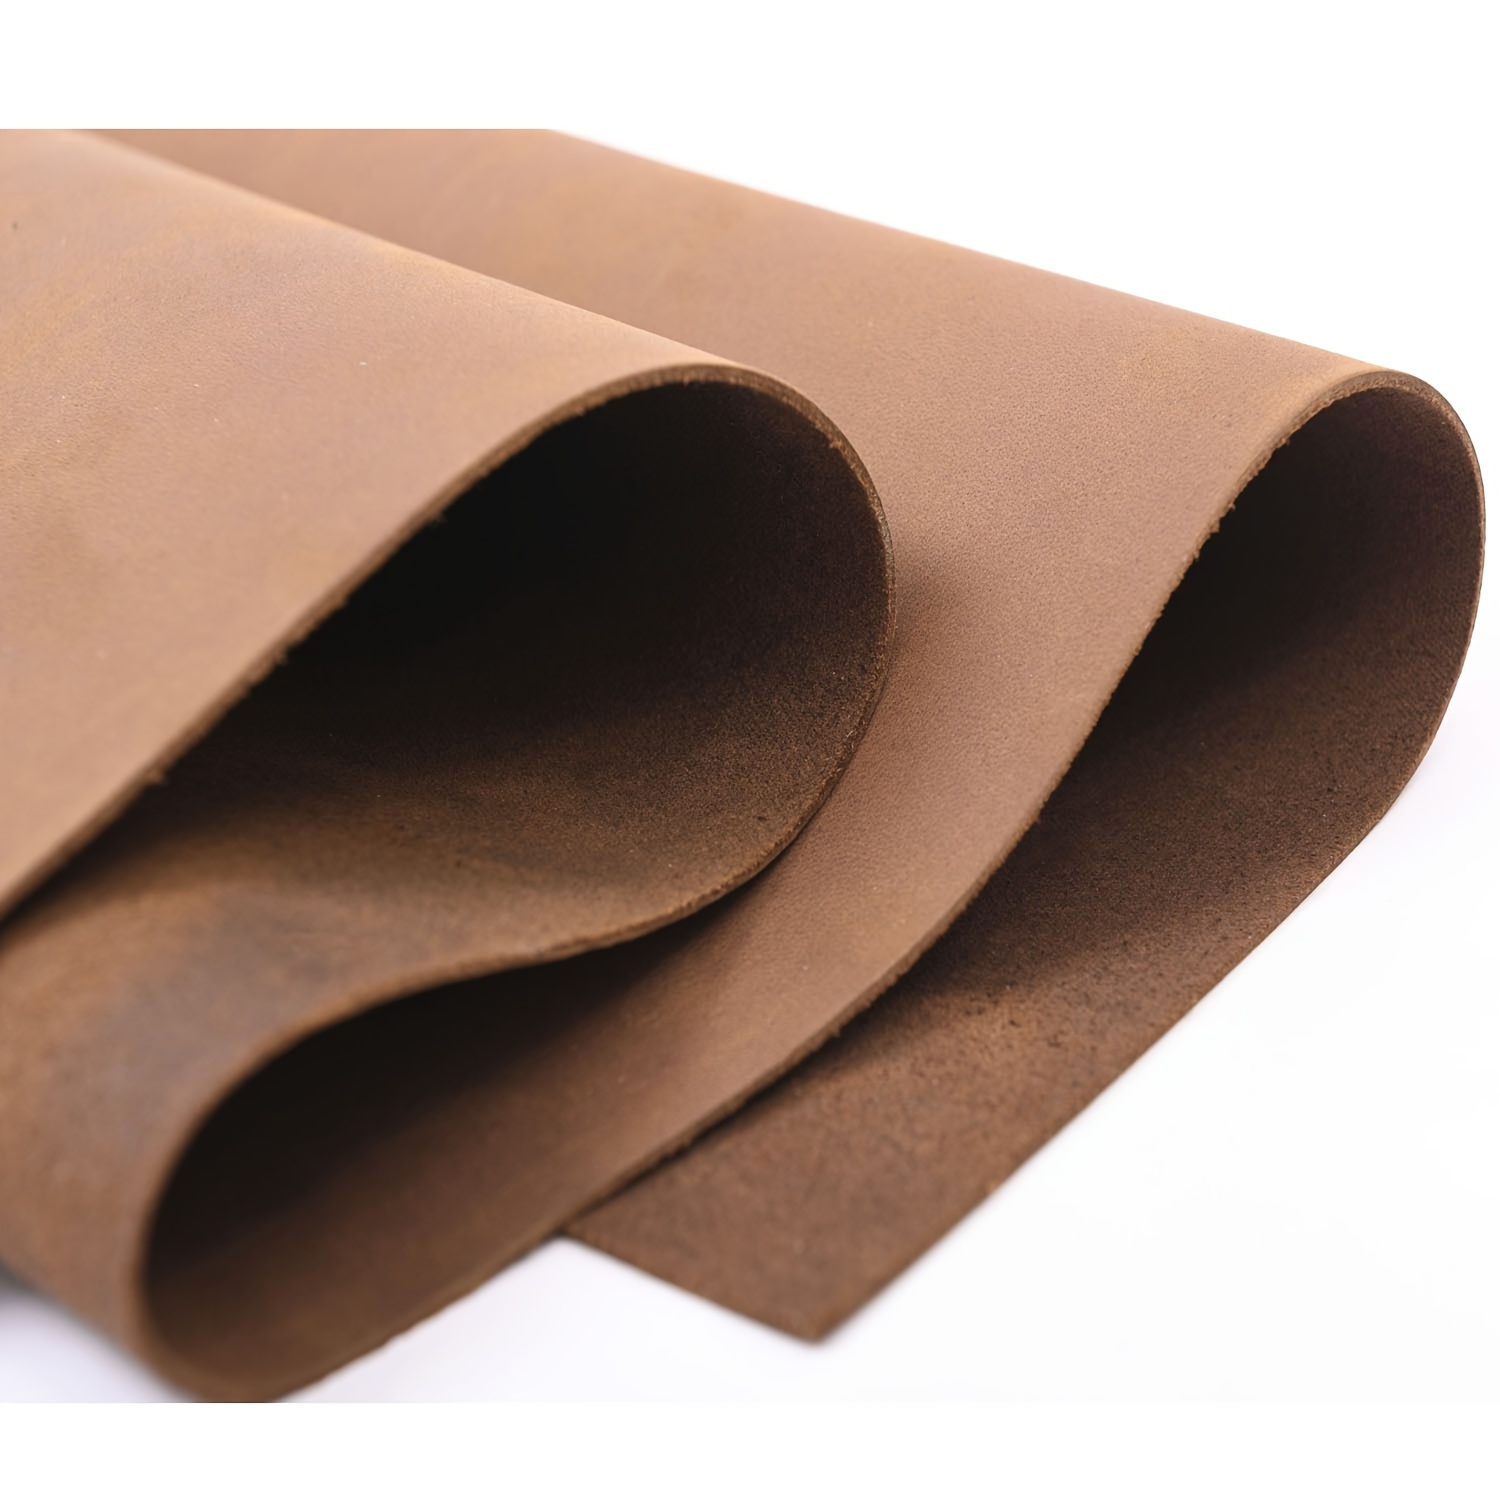 ANT MAKERS Thick Leather Sheets for Crafts Tooling Leather Square 1.8-2.0mm  Full Grain Leather Pieces Genuine Cowhide Leather for Crafts Sewing Hobby